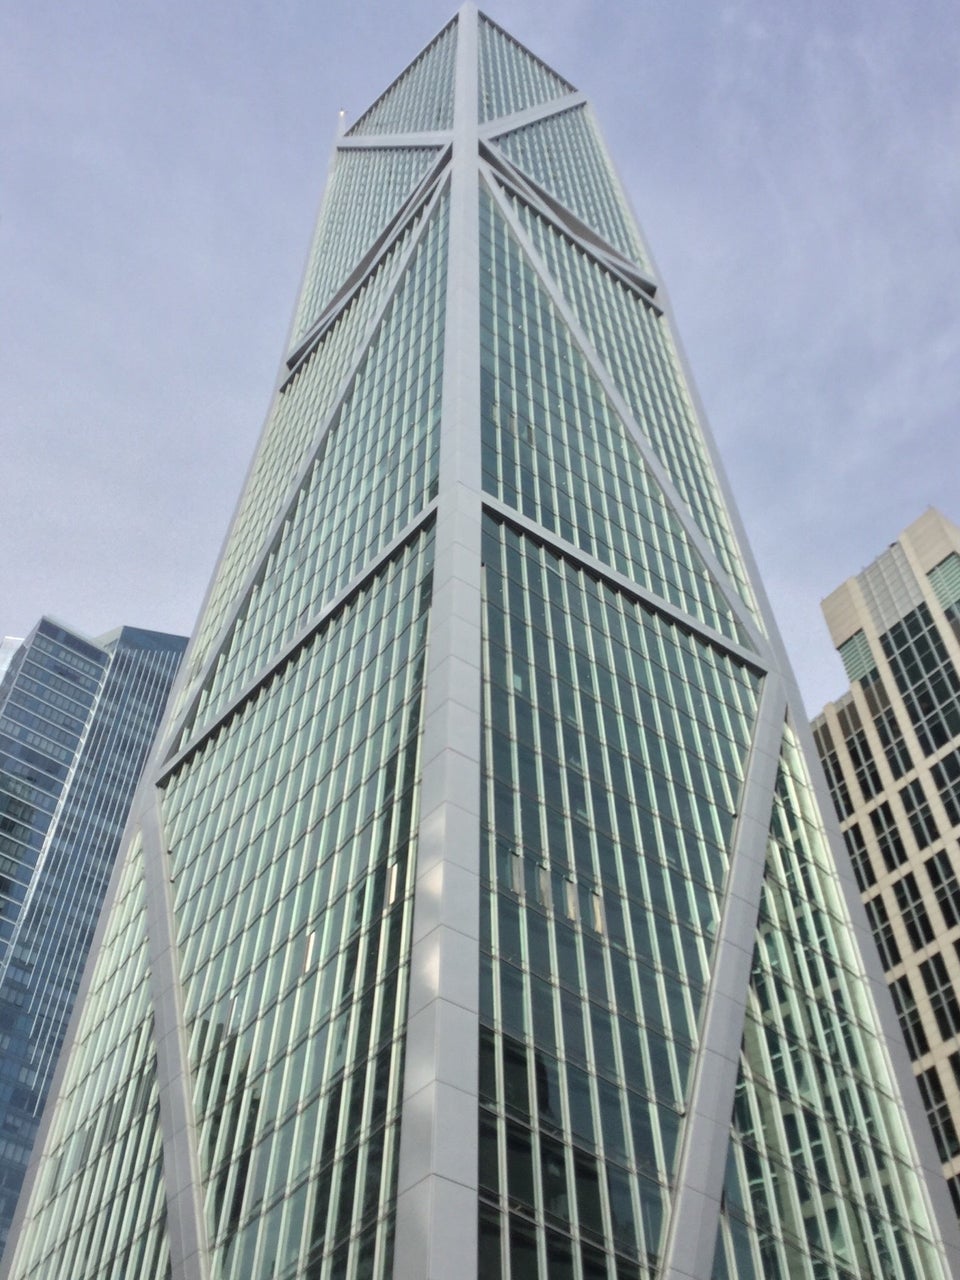 Looking up to the 181 Fremont building, a skyscraper with rectangular segments on its sides each crossed with a single diagonal, alternative so the diagonals look like they connect, with buildings on either side of it partially visible.